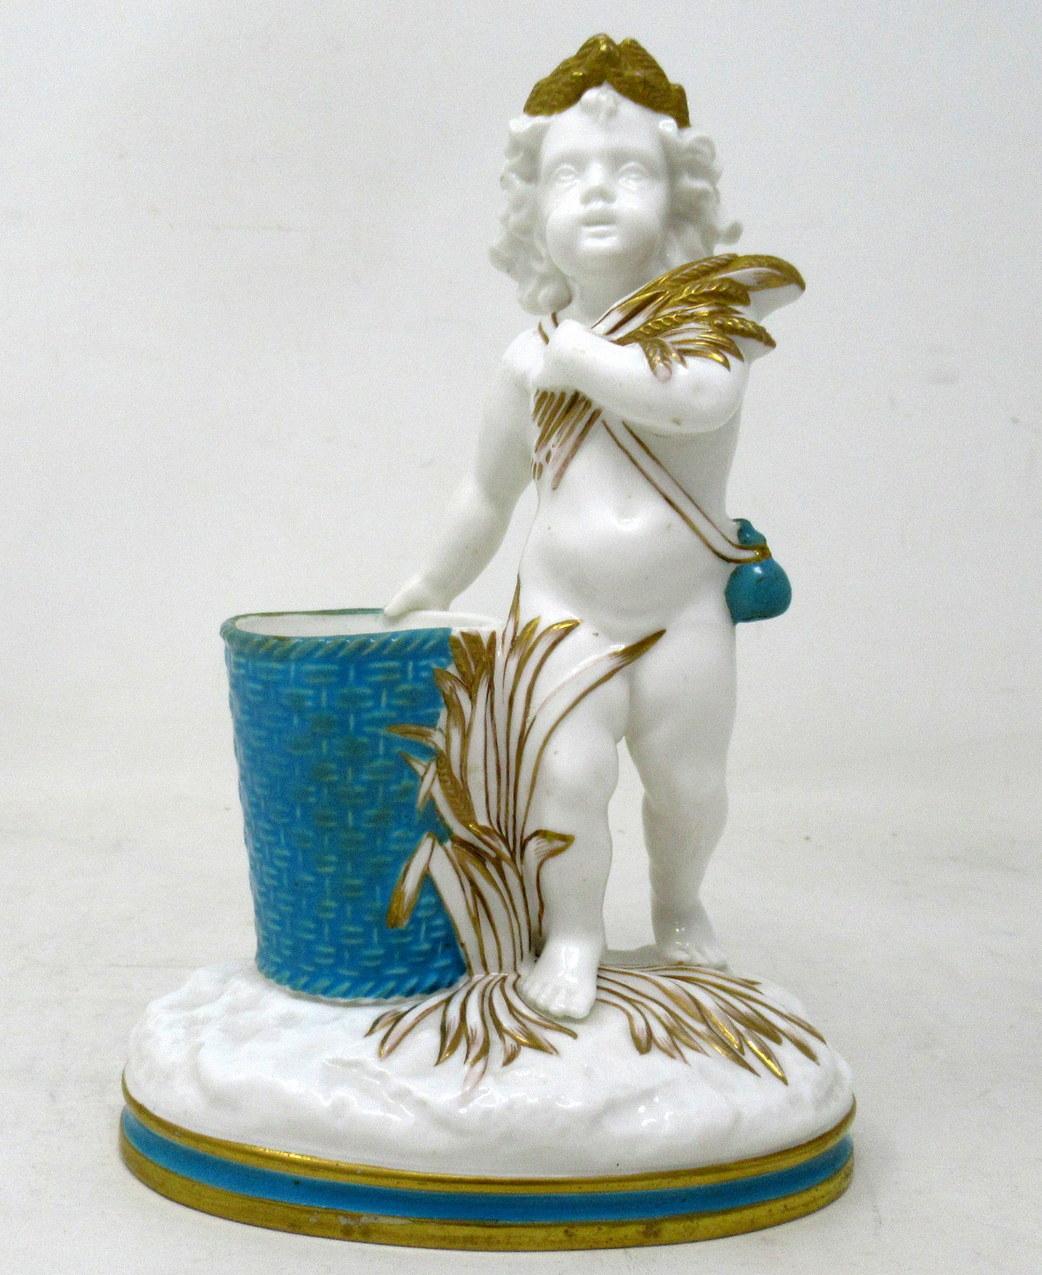 Stunning Example of an English Minton Porcelain Centerpiece or Flower Vase, depicting a scantily clad Female harvesting wheat standing on a naturalistic circular base beside a basket weave cylindrical container. Circa third quarter of the Nineteenth